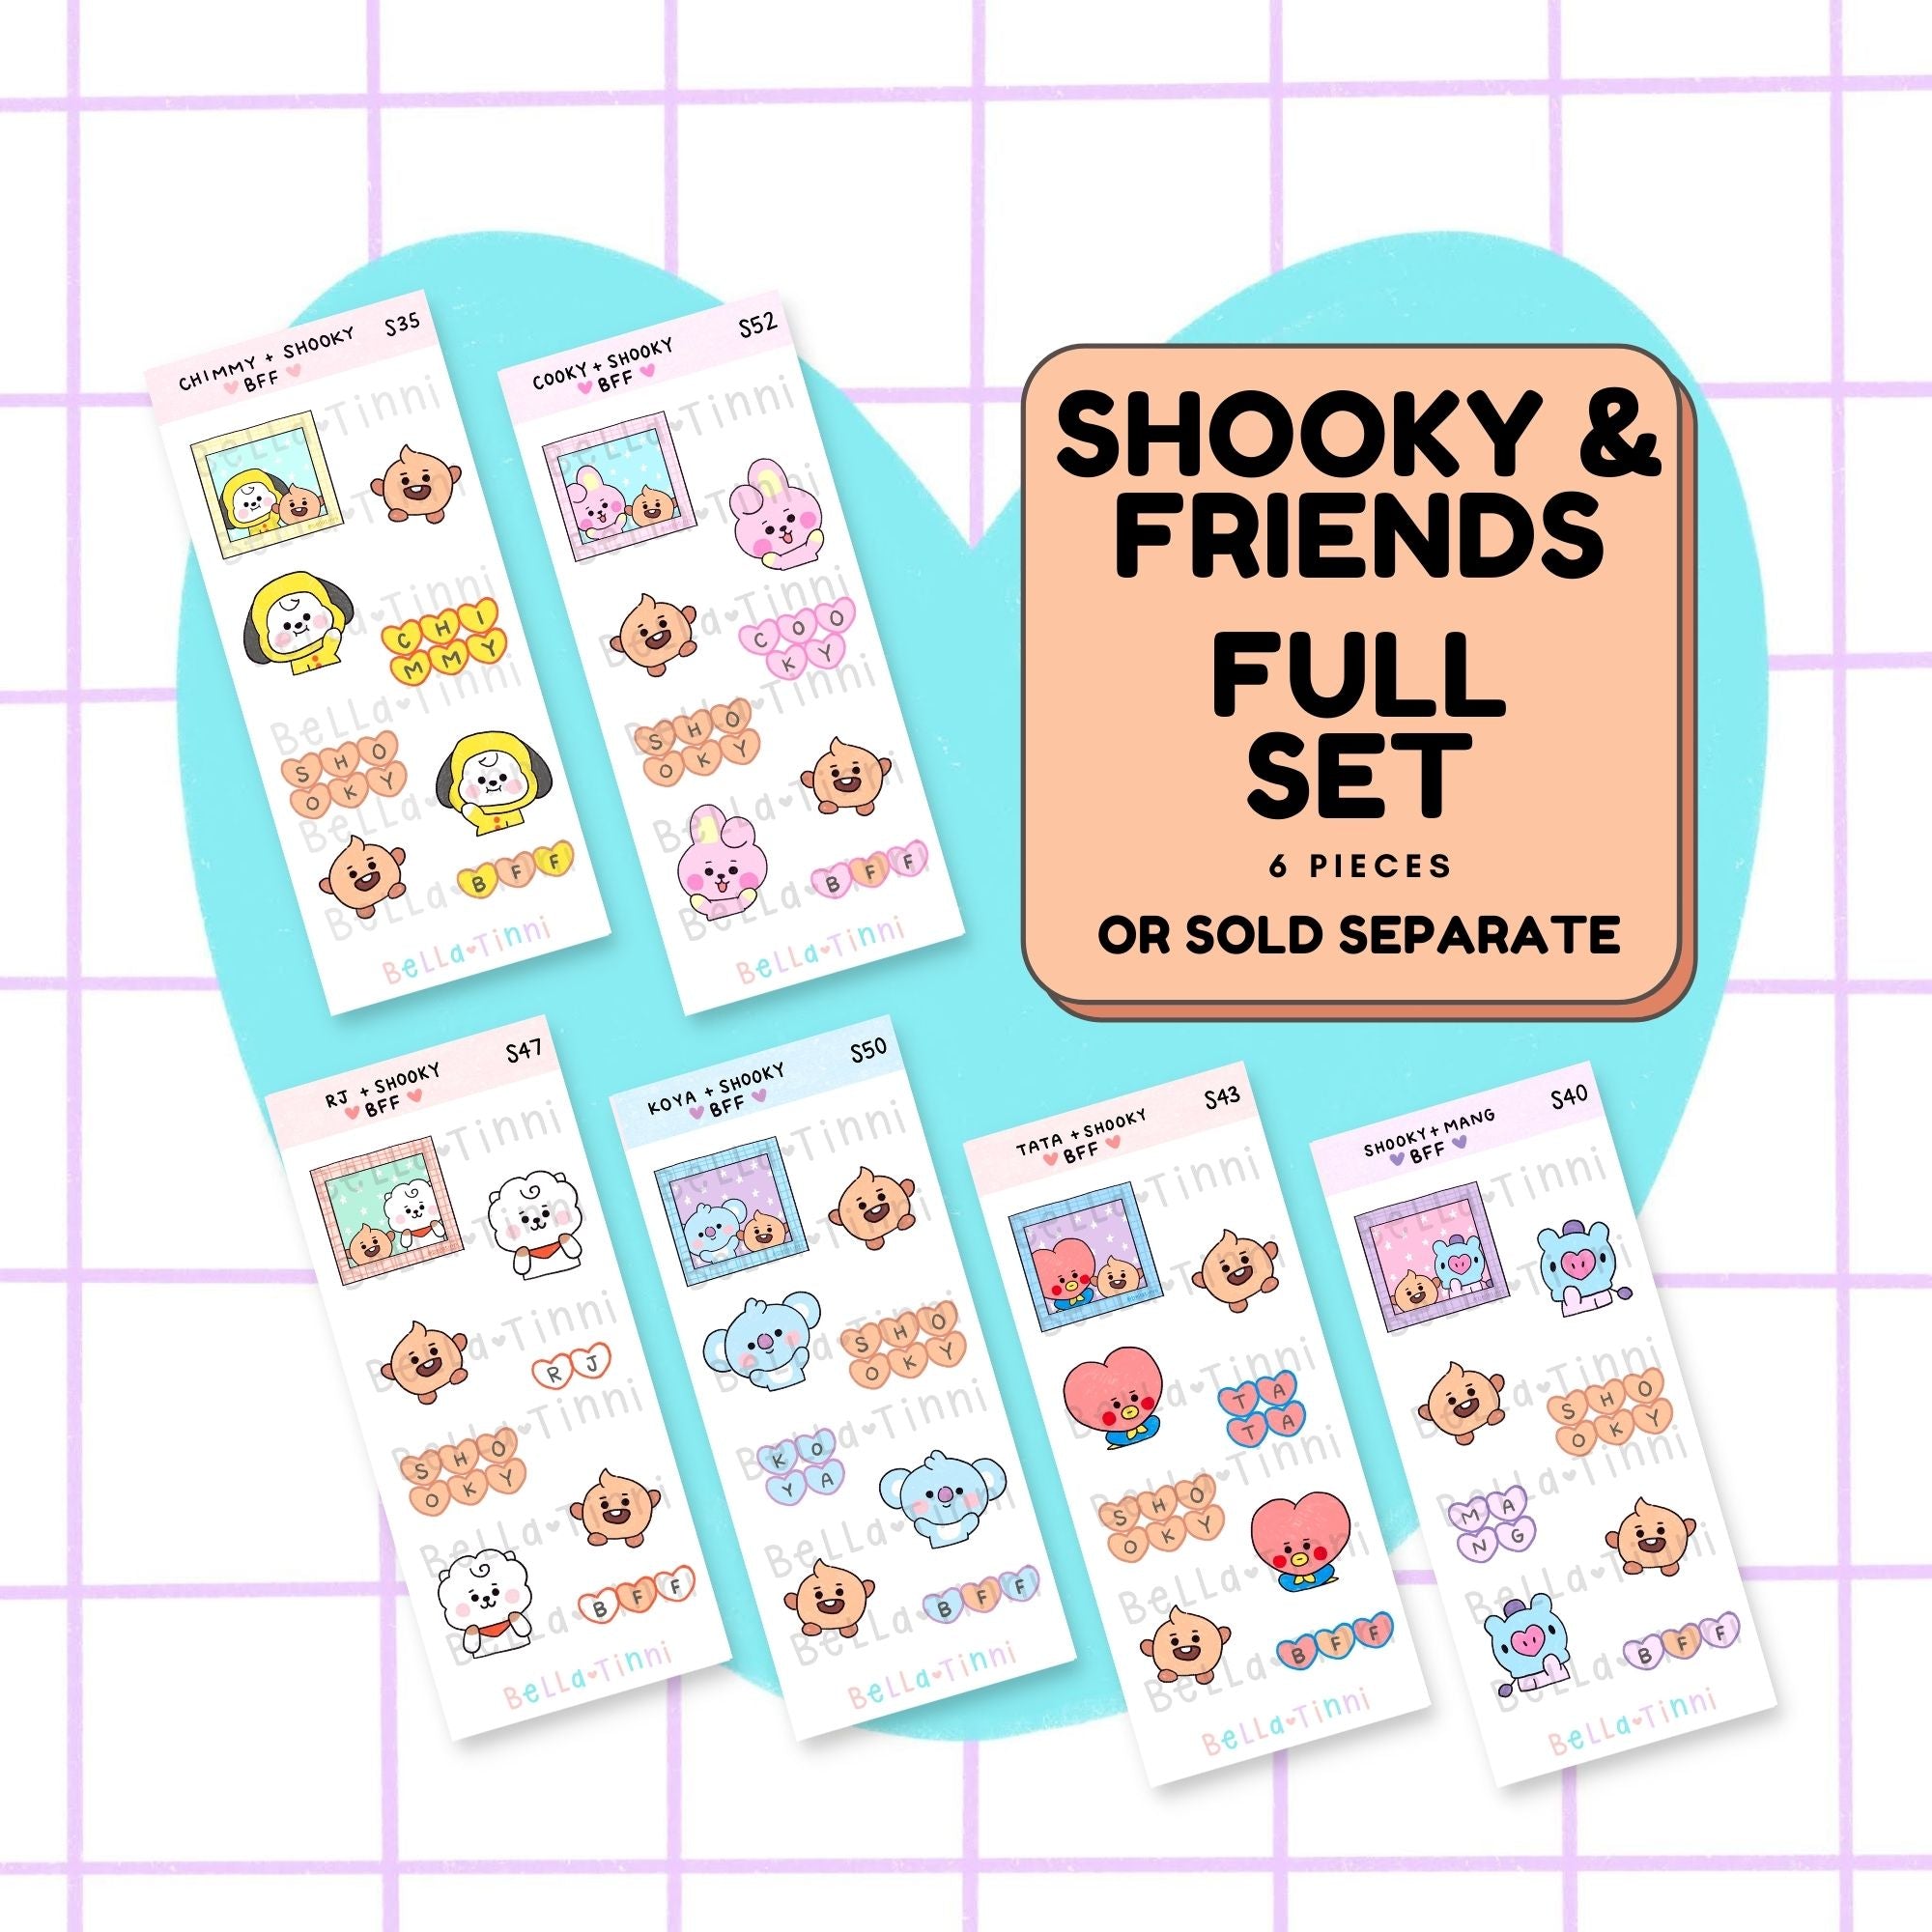 Shooky and Friends deco - S59